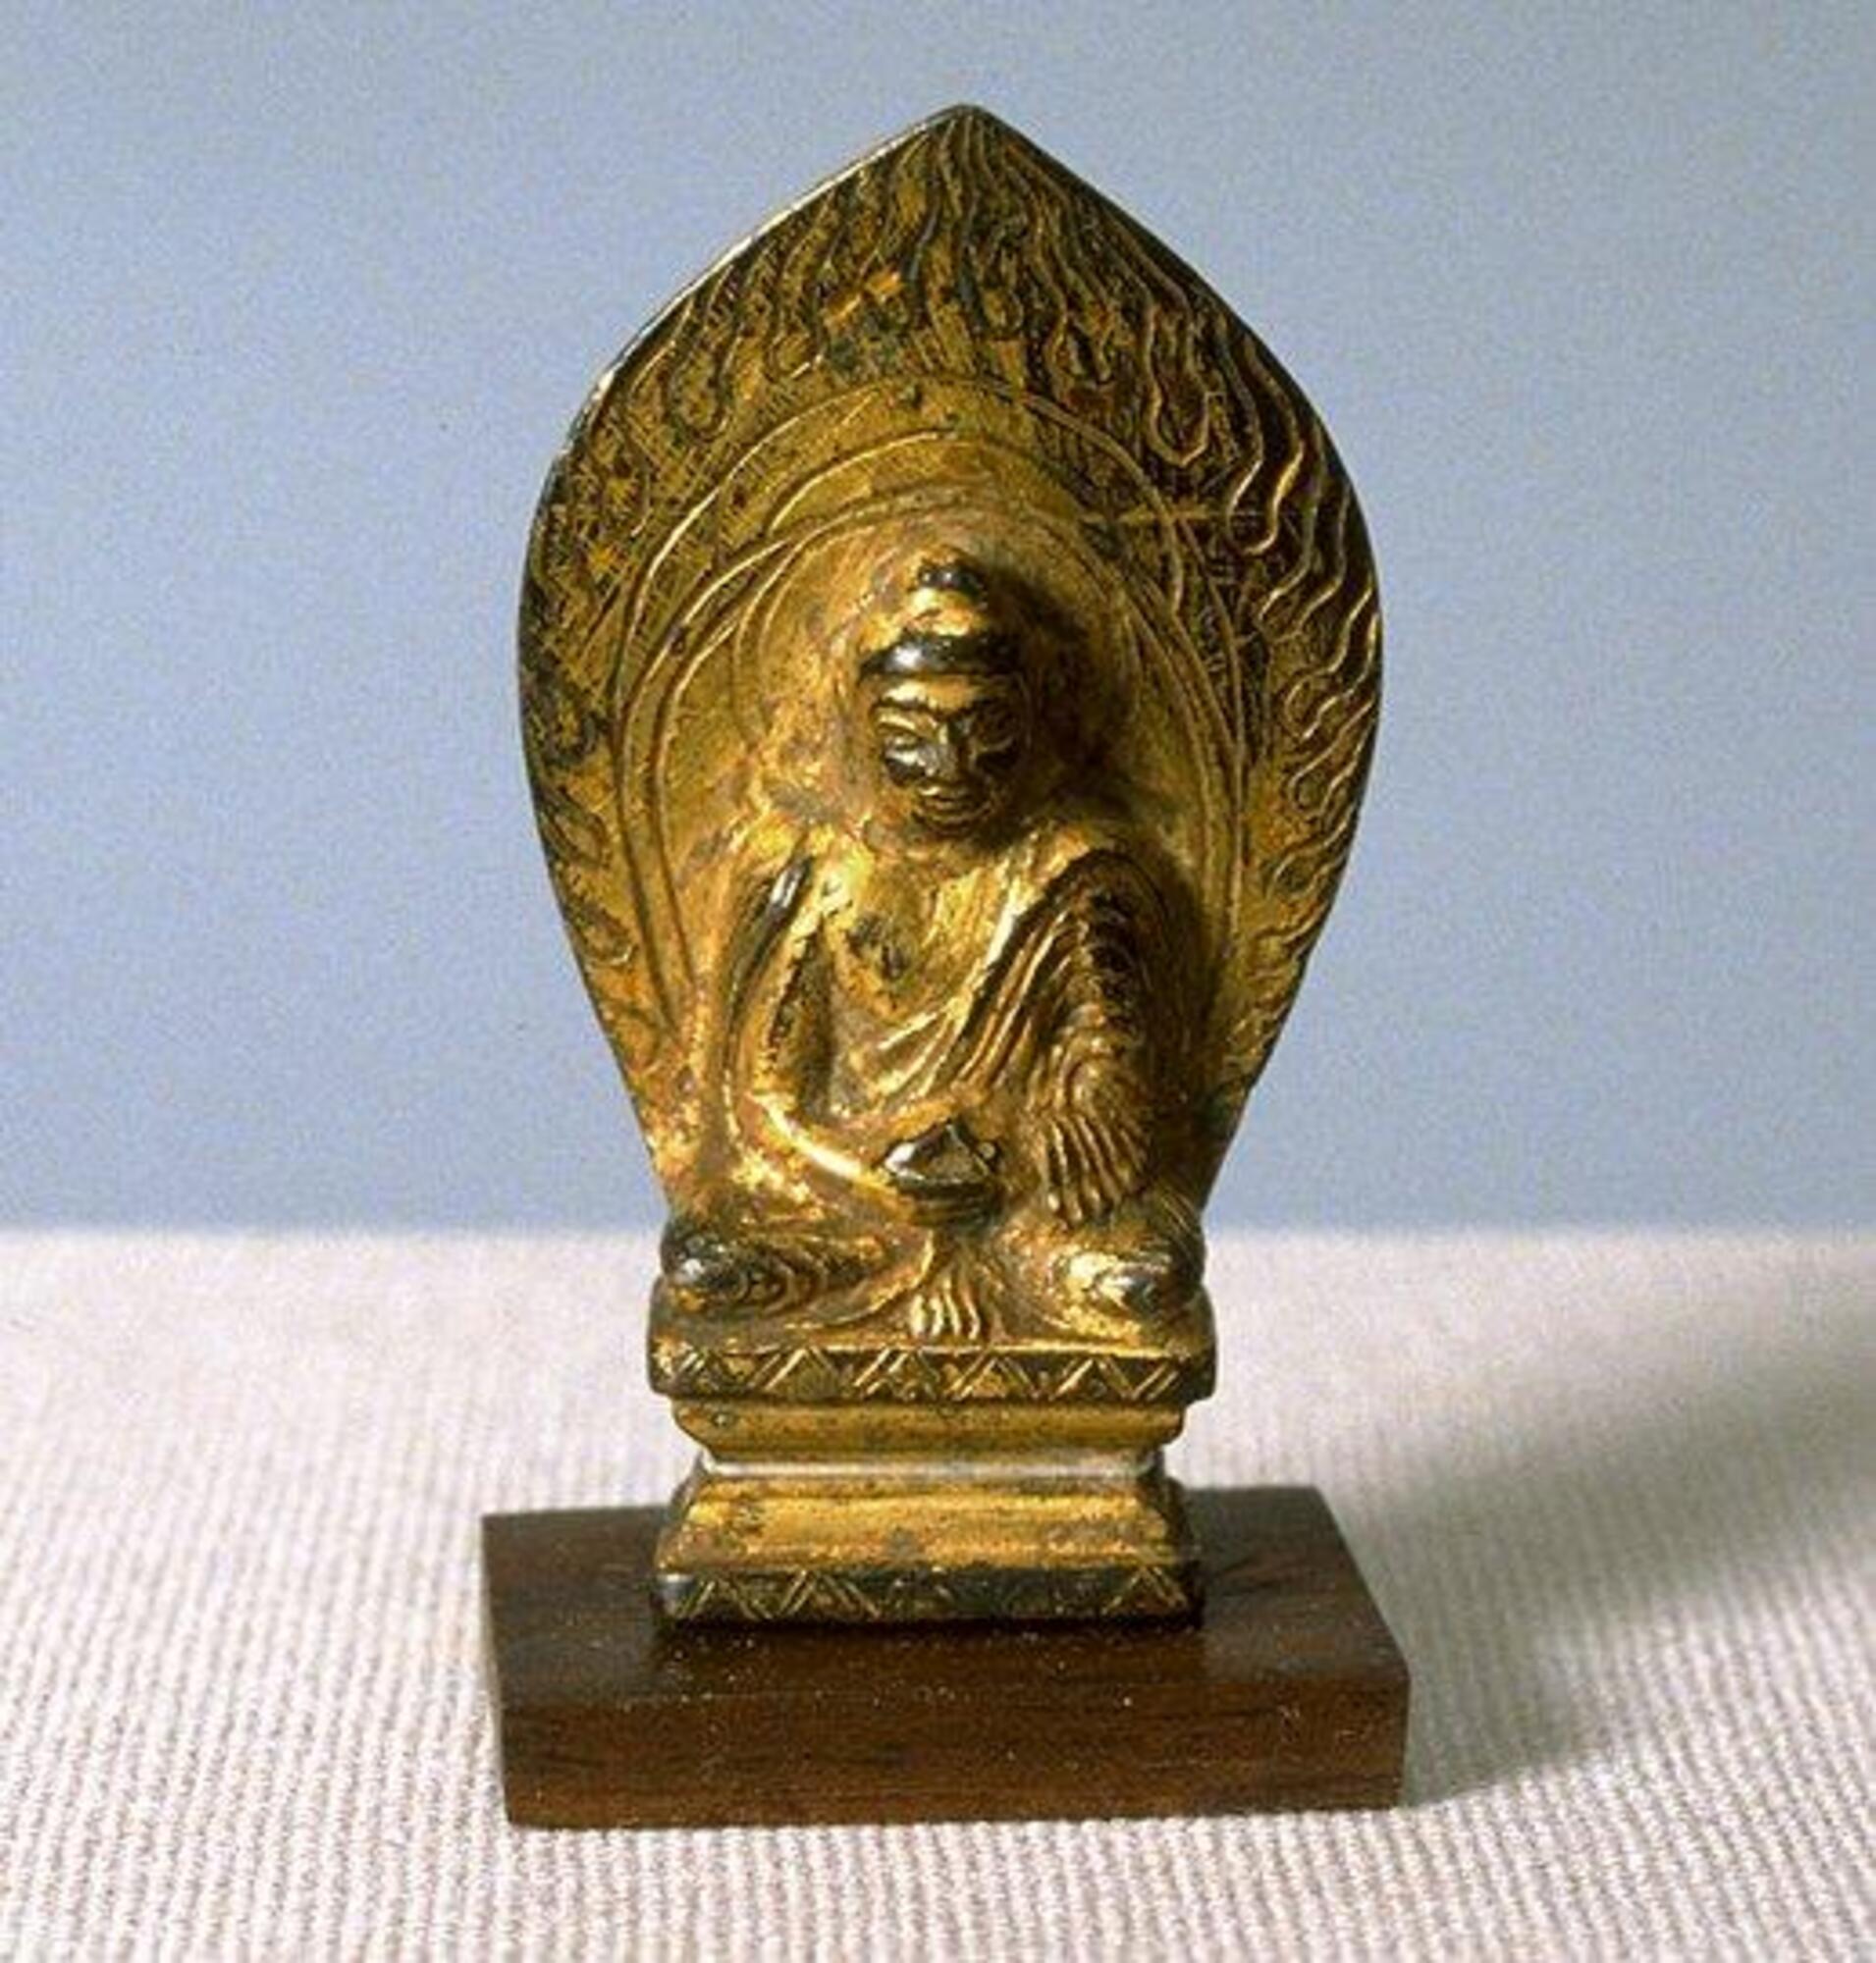 Small gilt bronze seated Buddha with Indian and Central Asian characteristics, including the pedestal he is seated on, folds of his robe, and the incised flames in the body halo encompassing him.